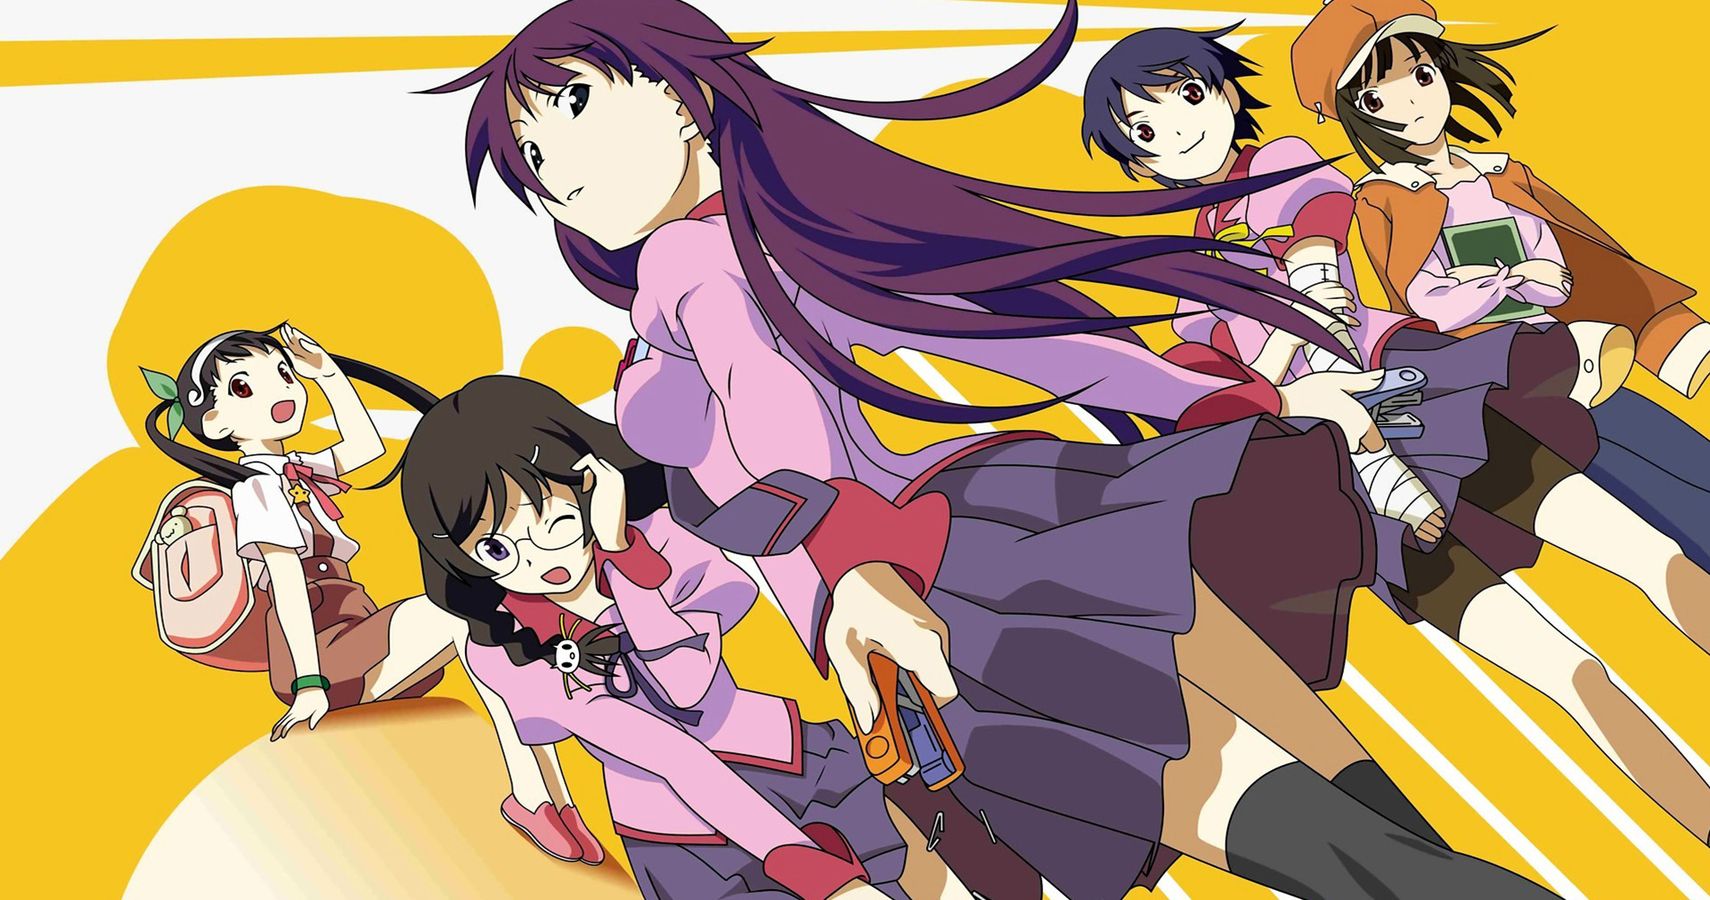 Official artwork for the Monogatari anime featuring the main characters